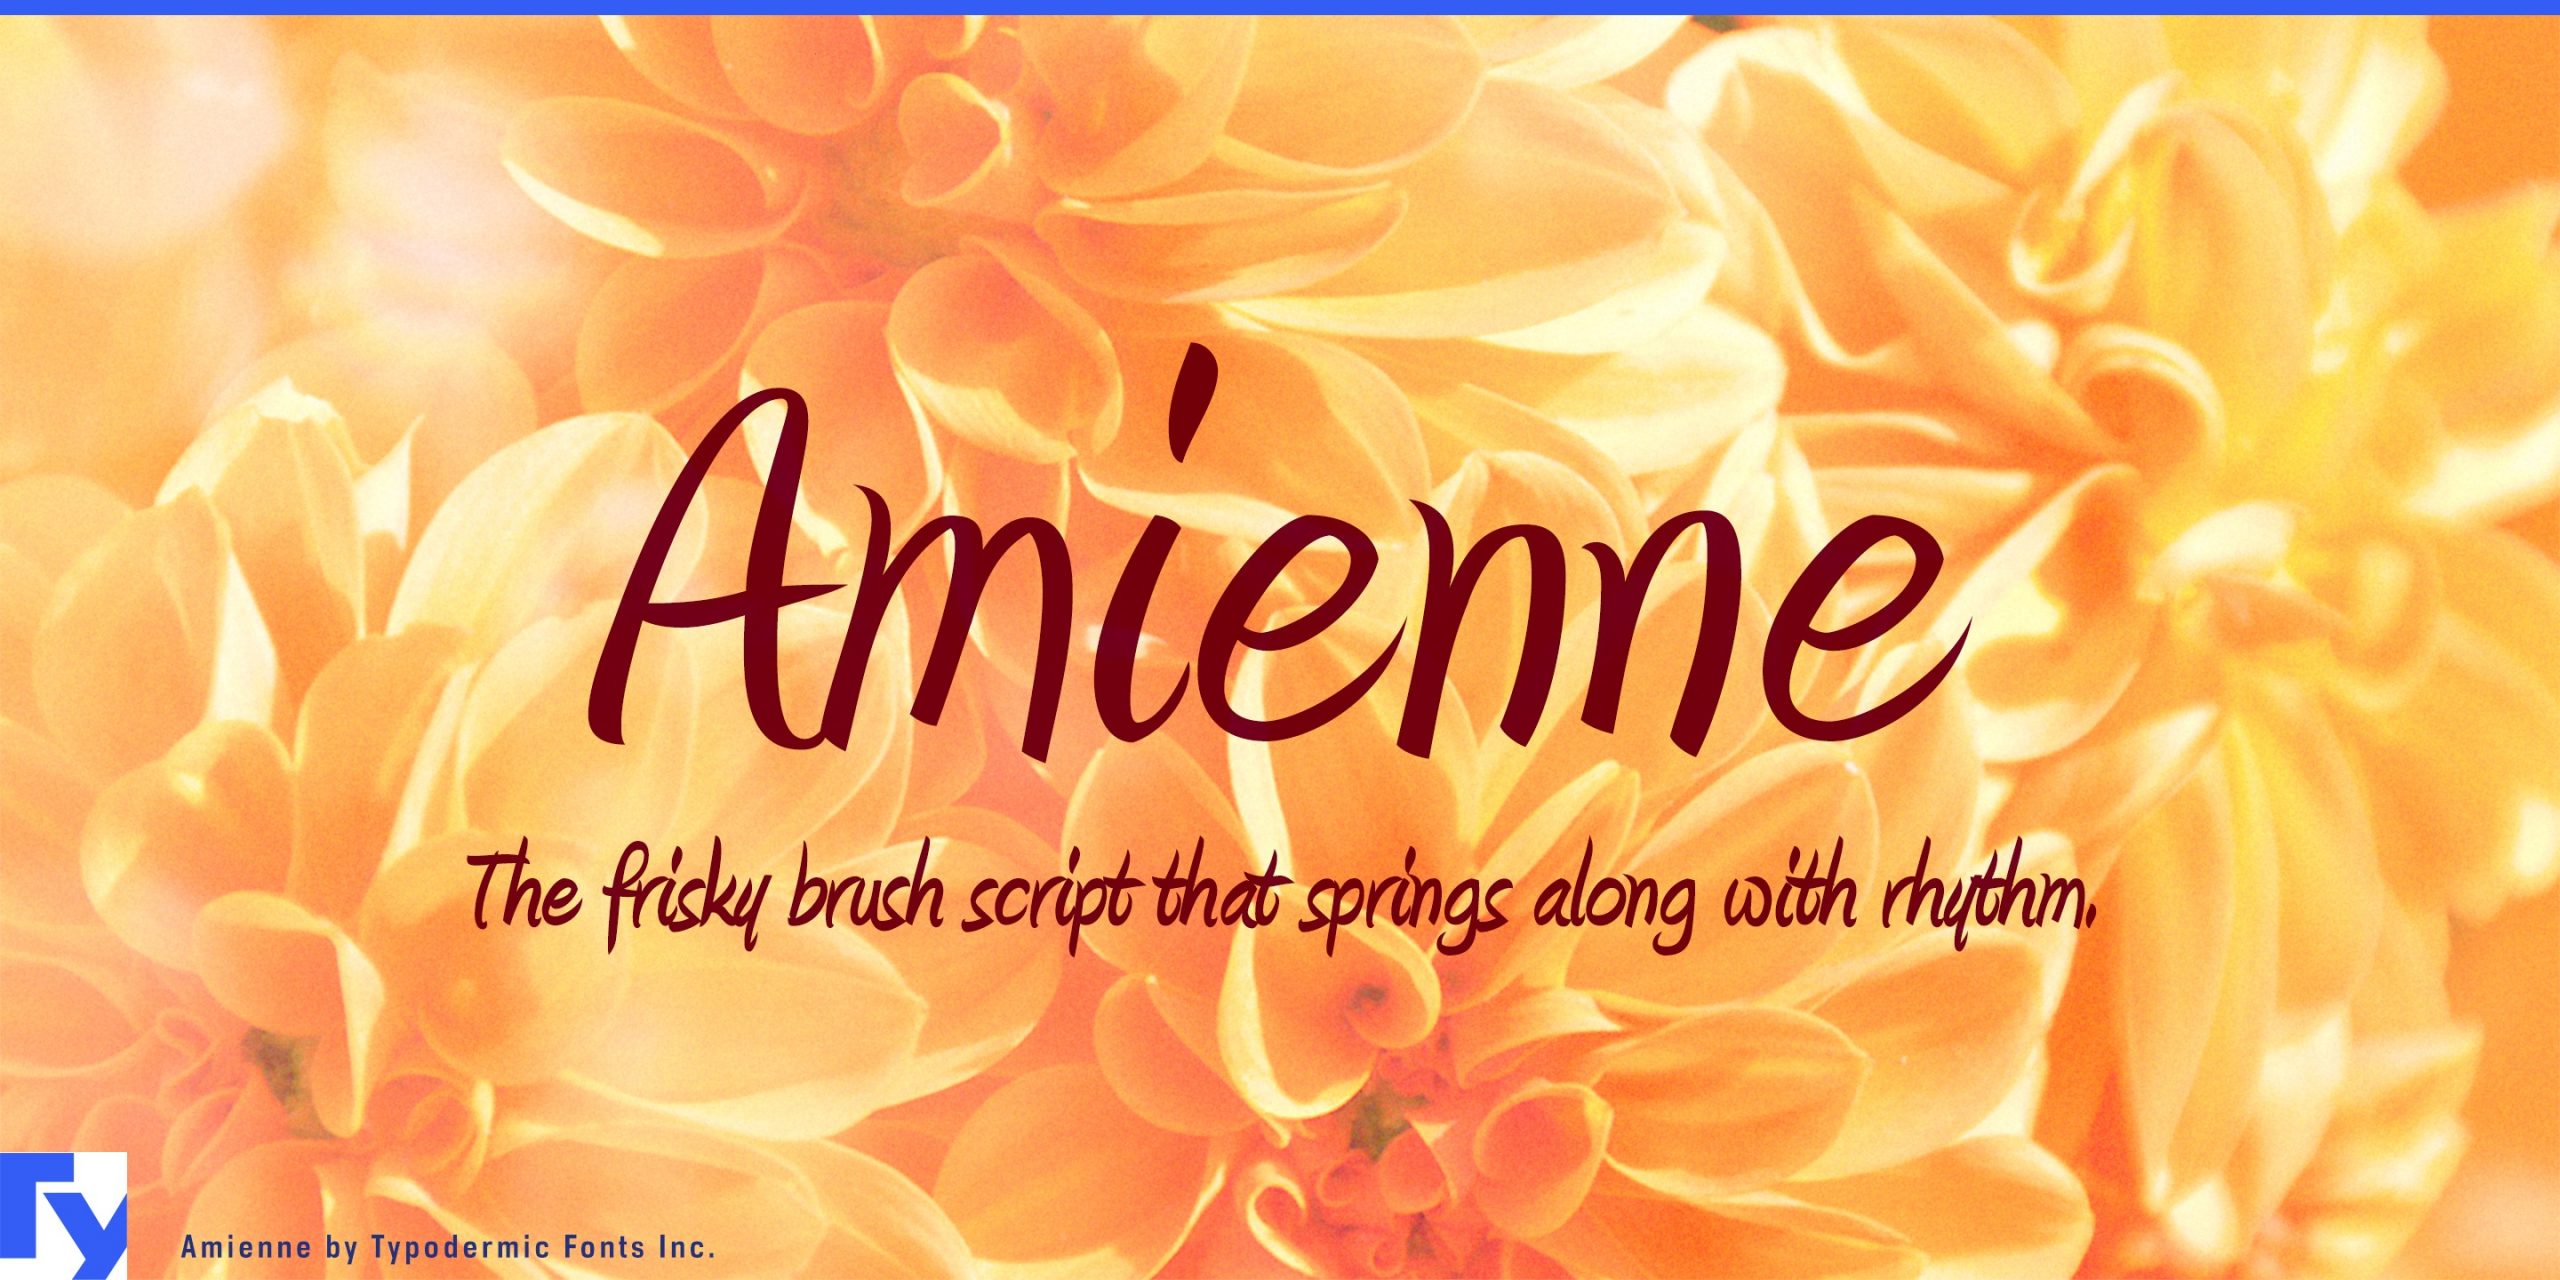 Amienne Typeface: Dance Across the Page with Whimsical Energy